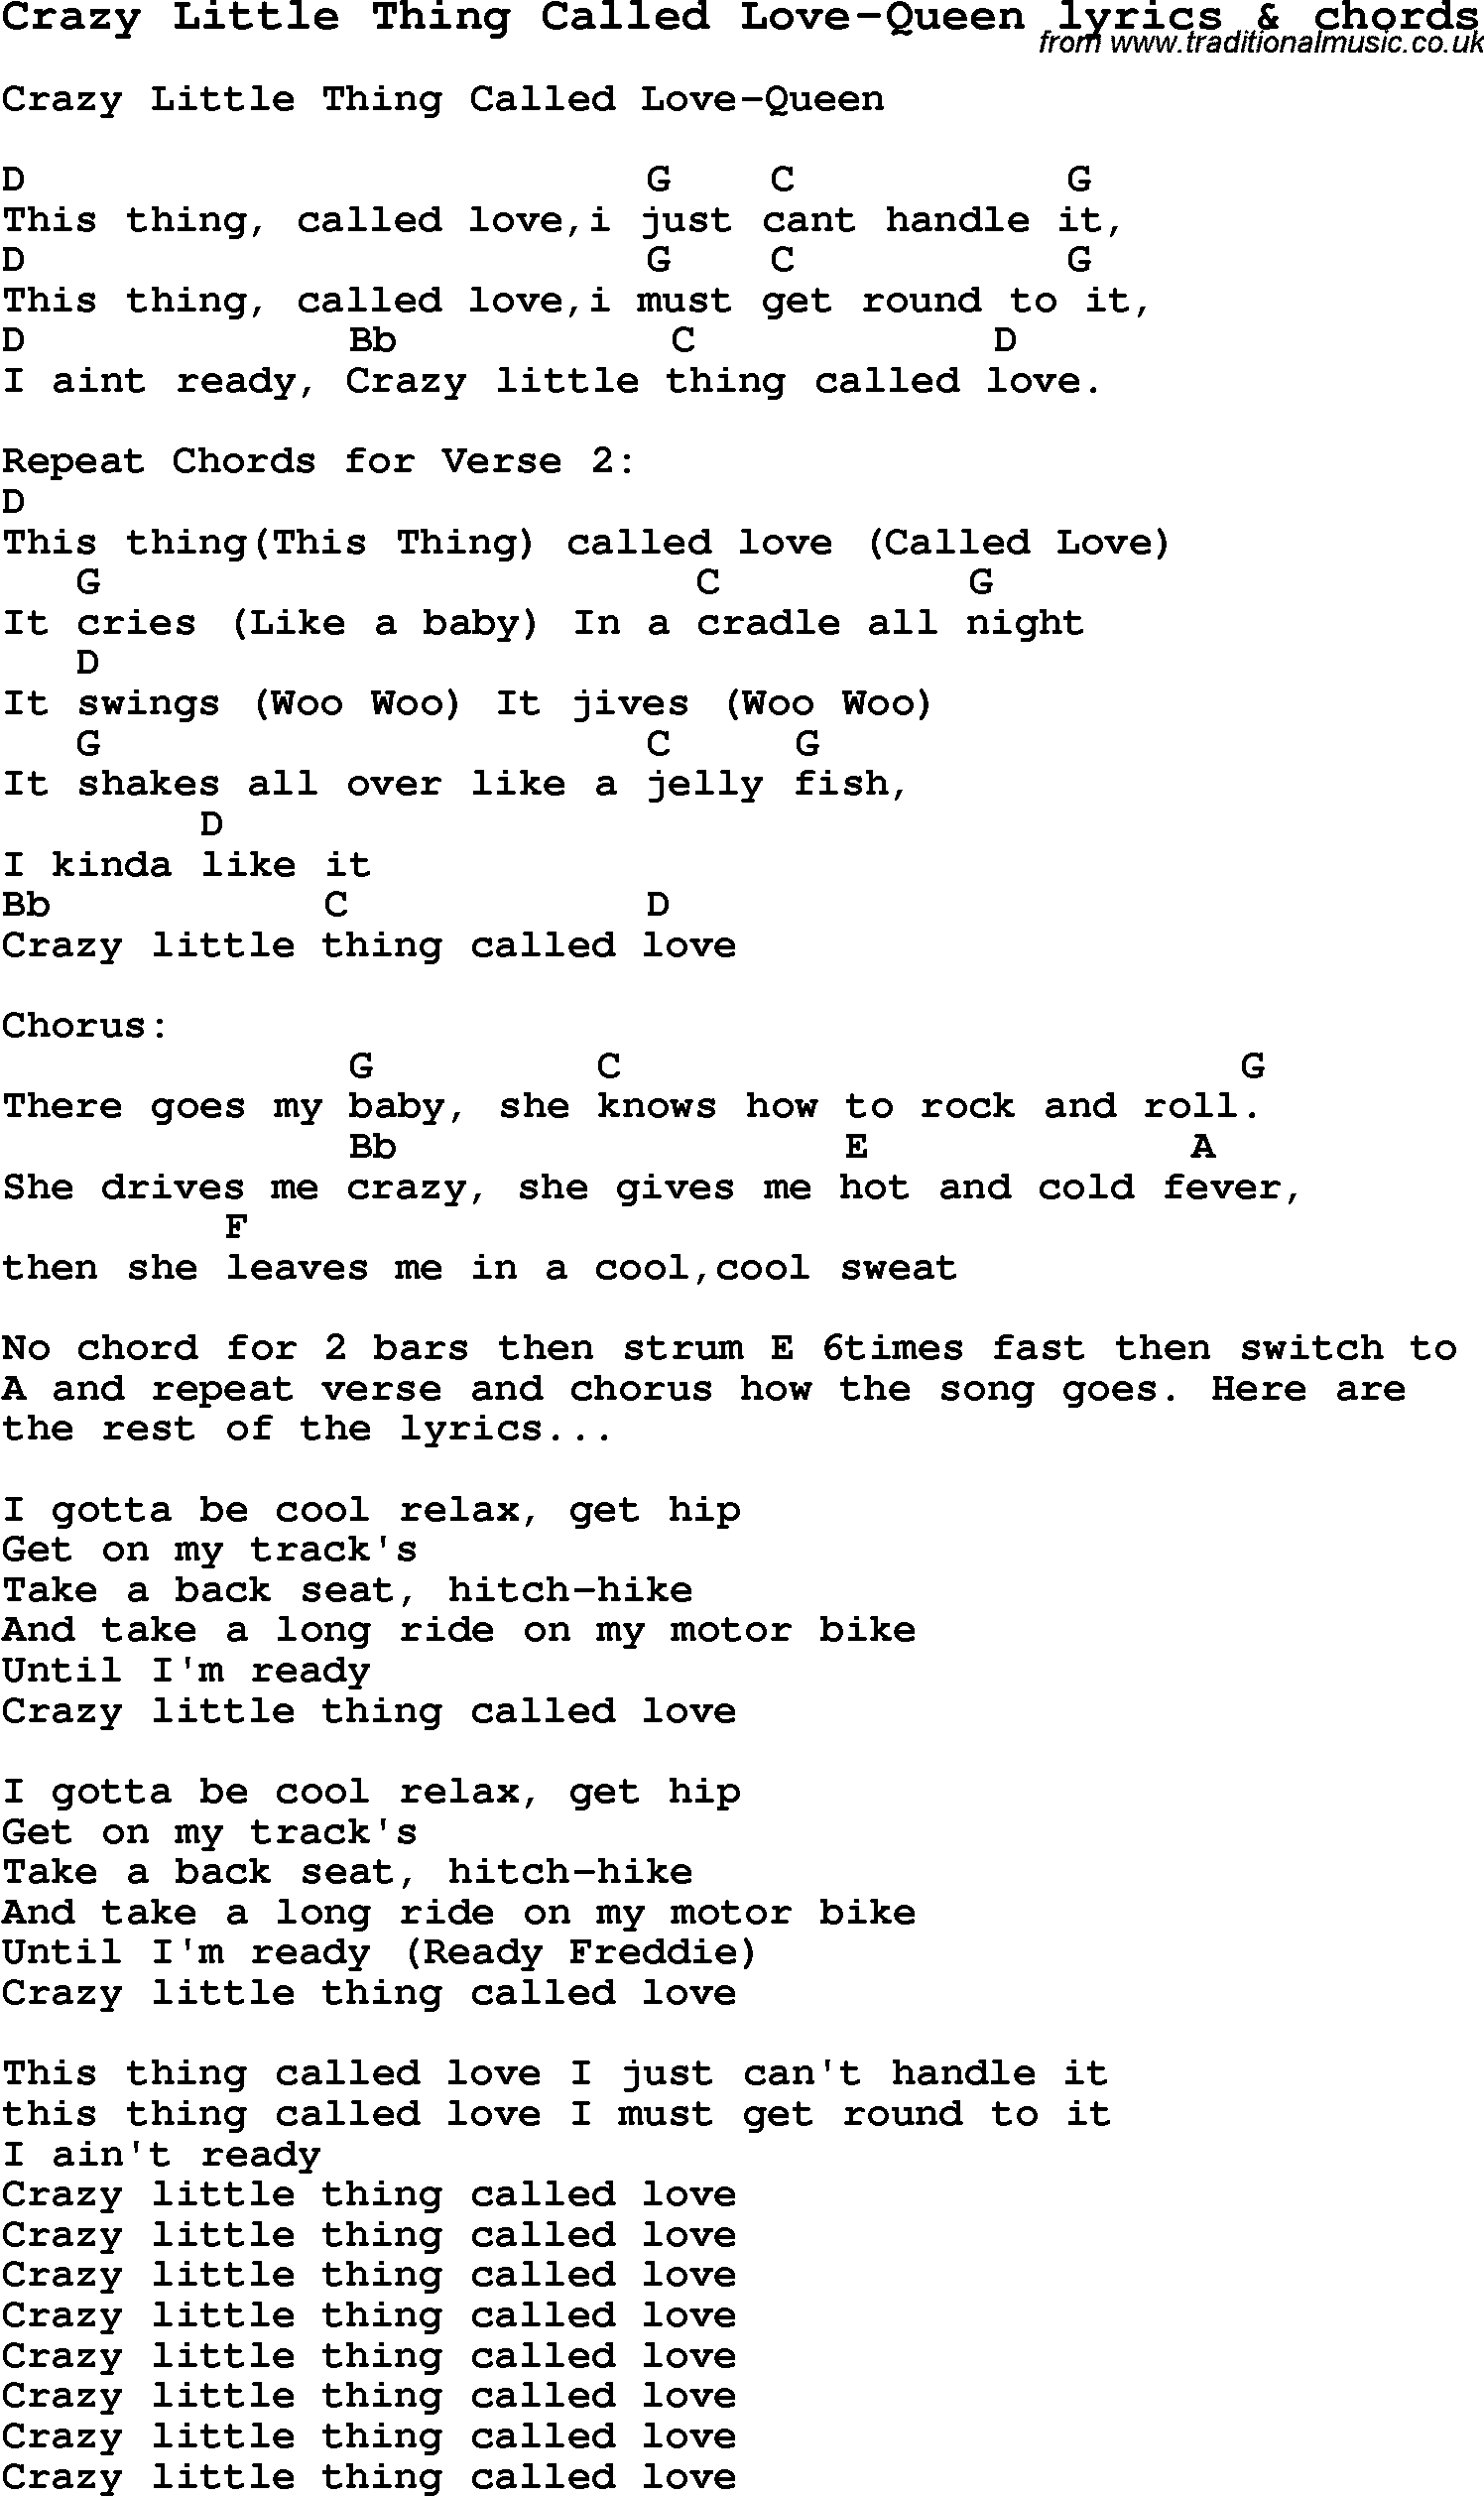 Love Song Lyrics for: Crazy Little Thing Called Love-Queen with chords ...